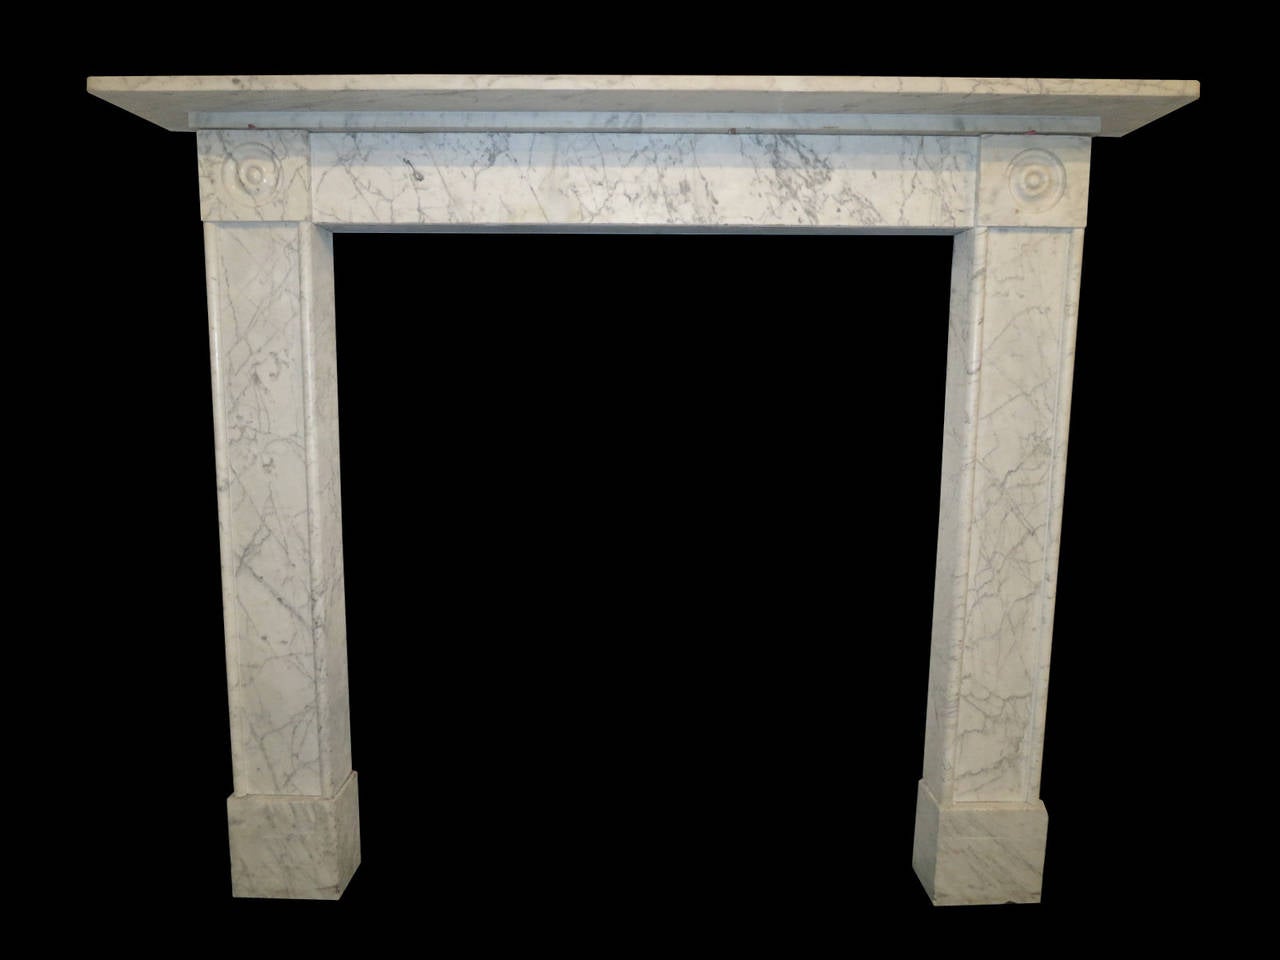 A very late 18th or turn of the century fireplace in pencil vein Carrara marble. Having typical characteristics of the 18th century with deeper inside returns solid marble foot blocks and stone backed jambs and frieze. The inverted panel jambs